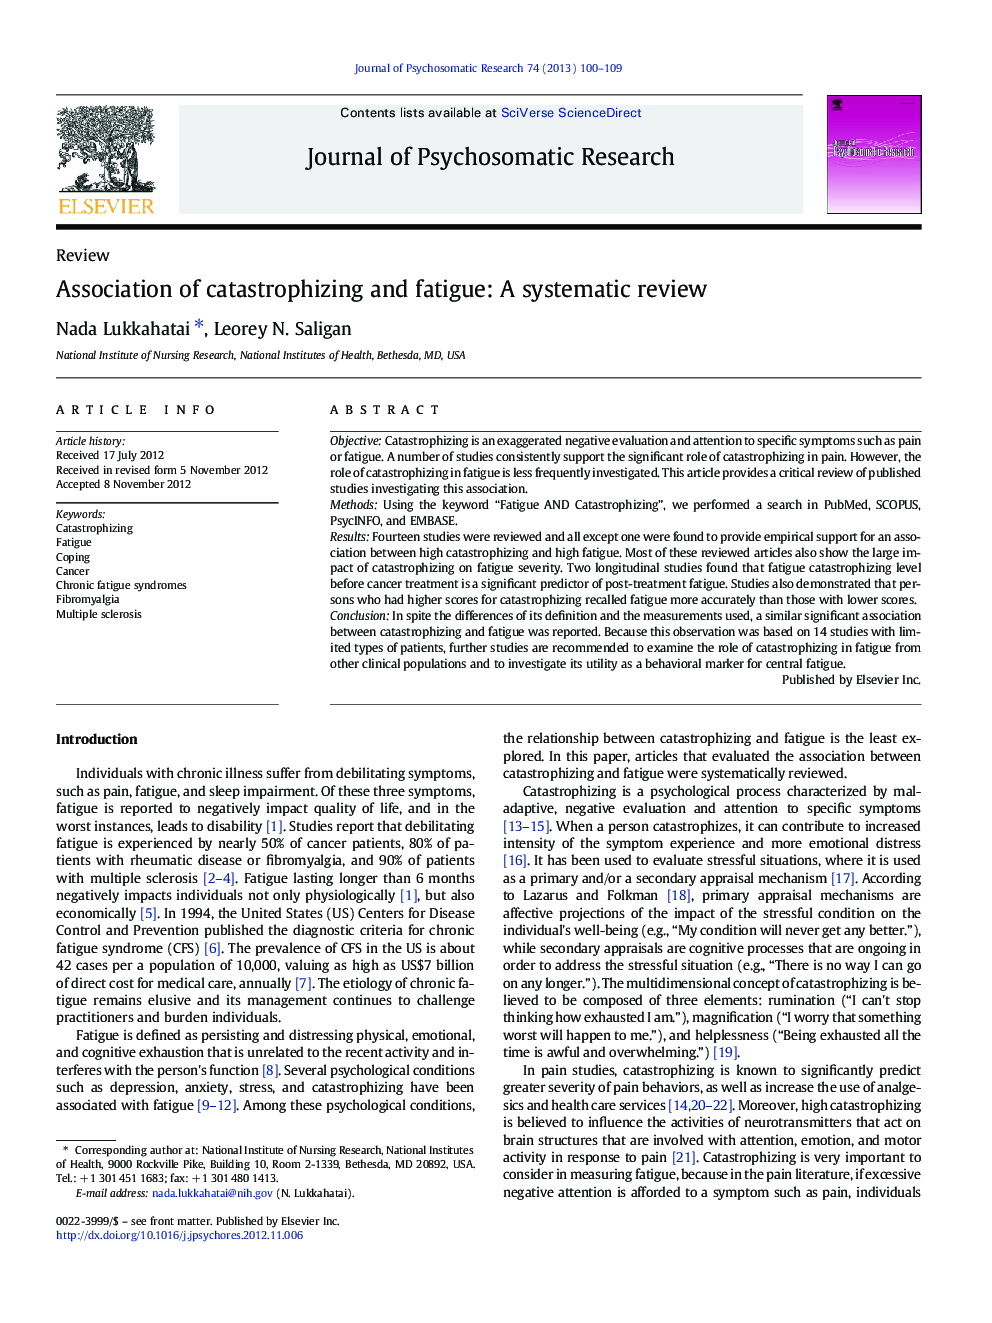 Association of catastrophizing and fatigue: A systematic review